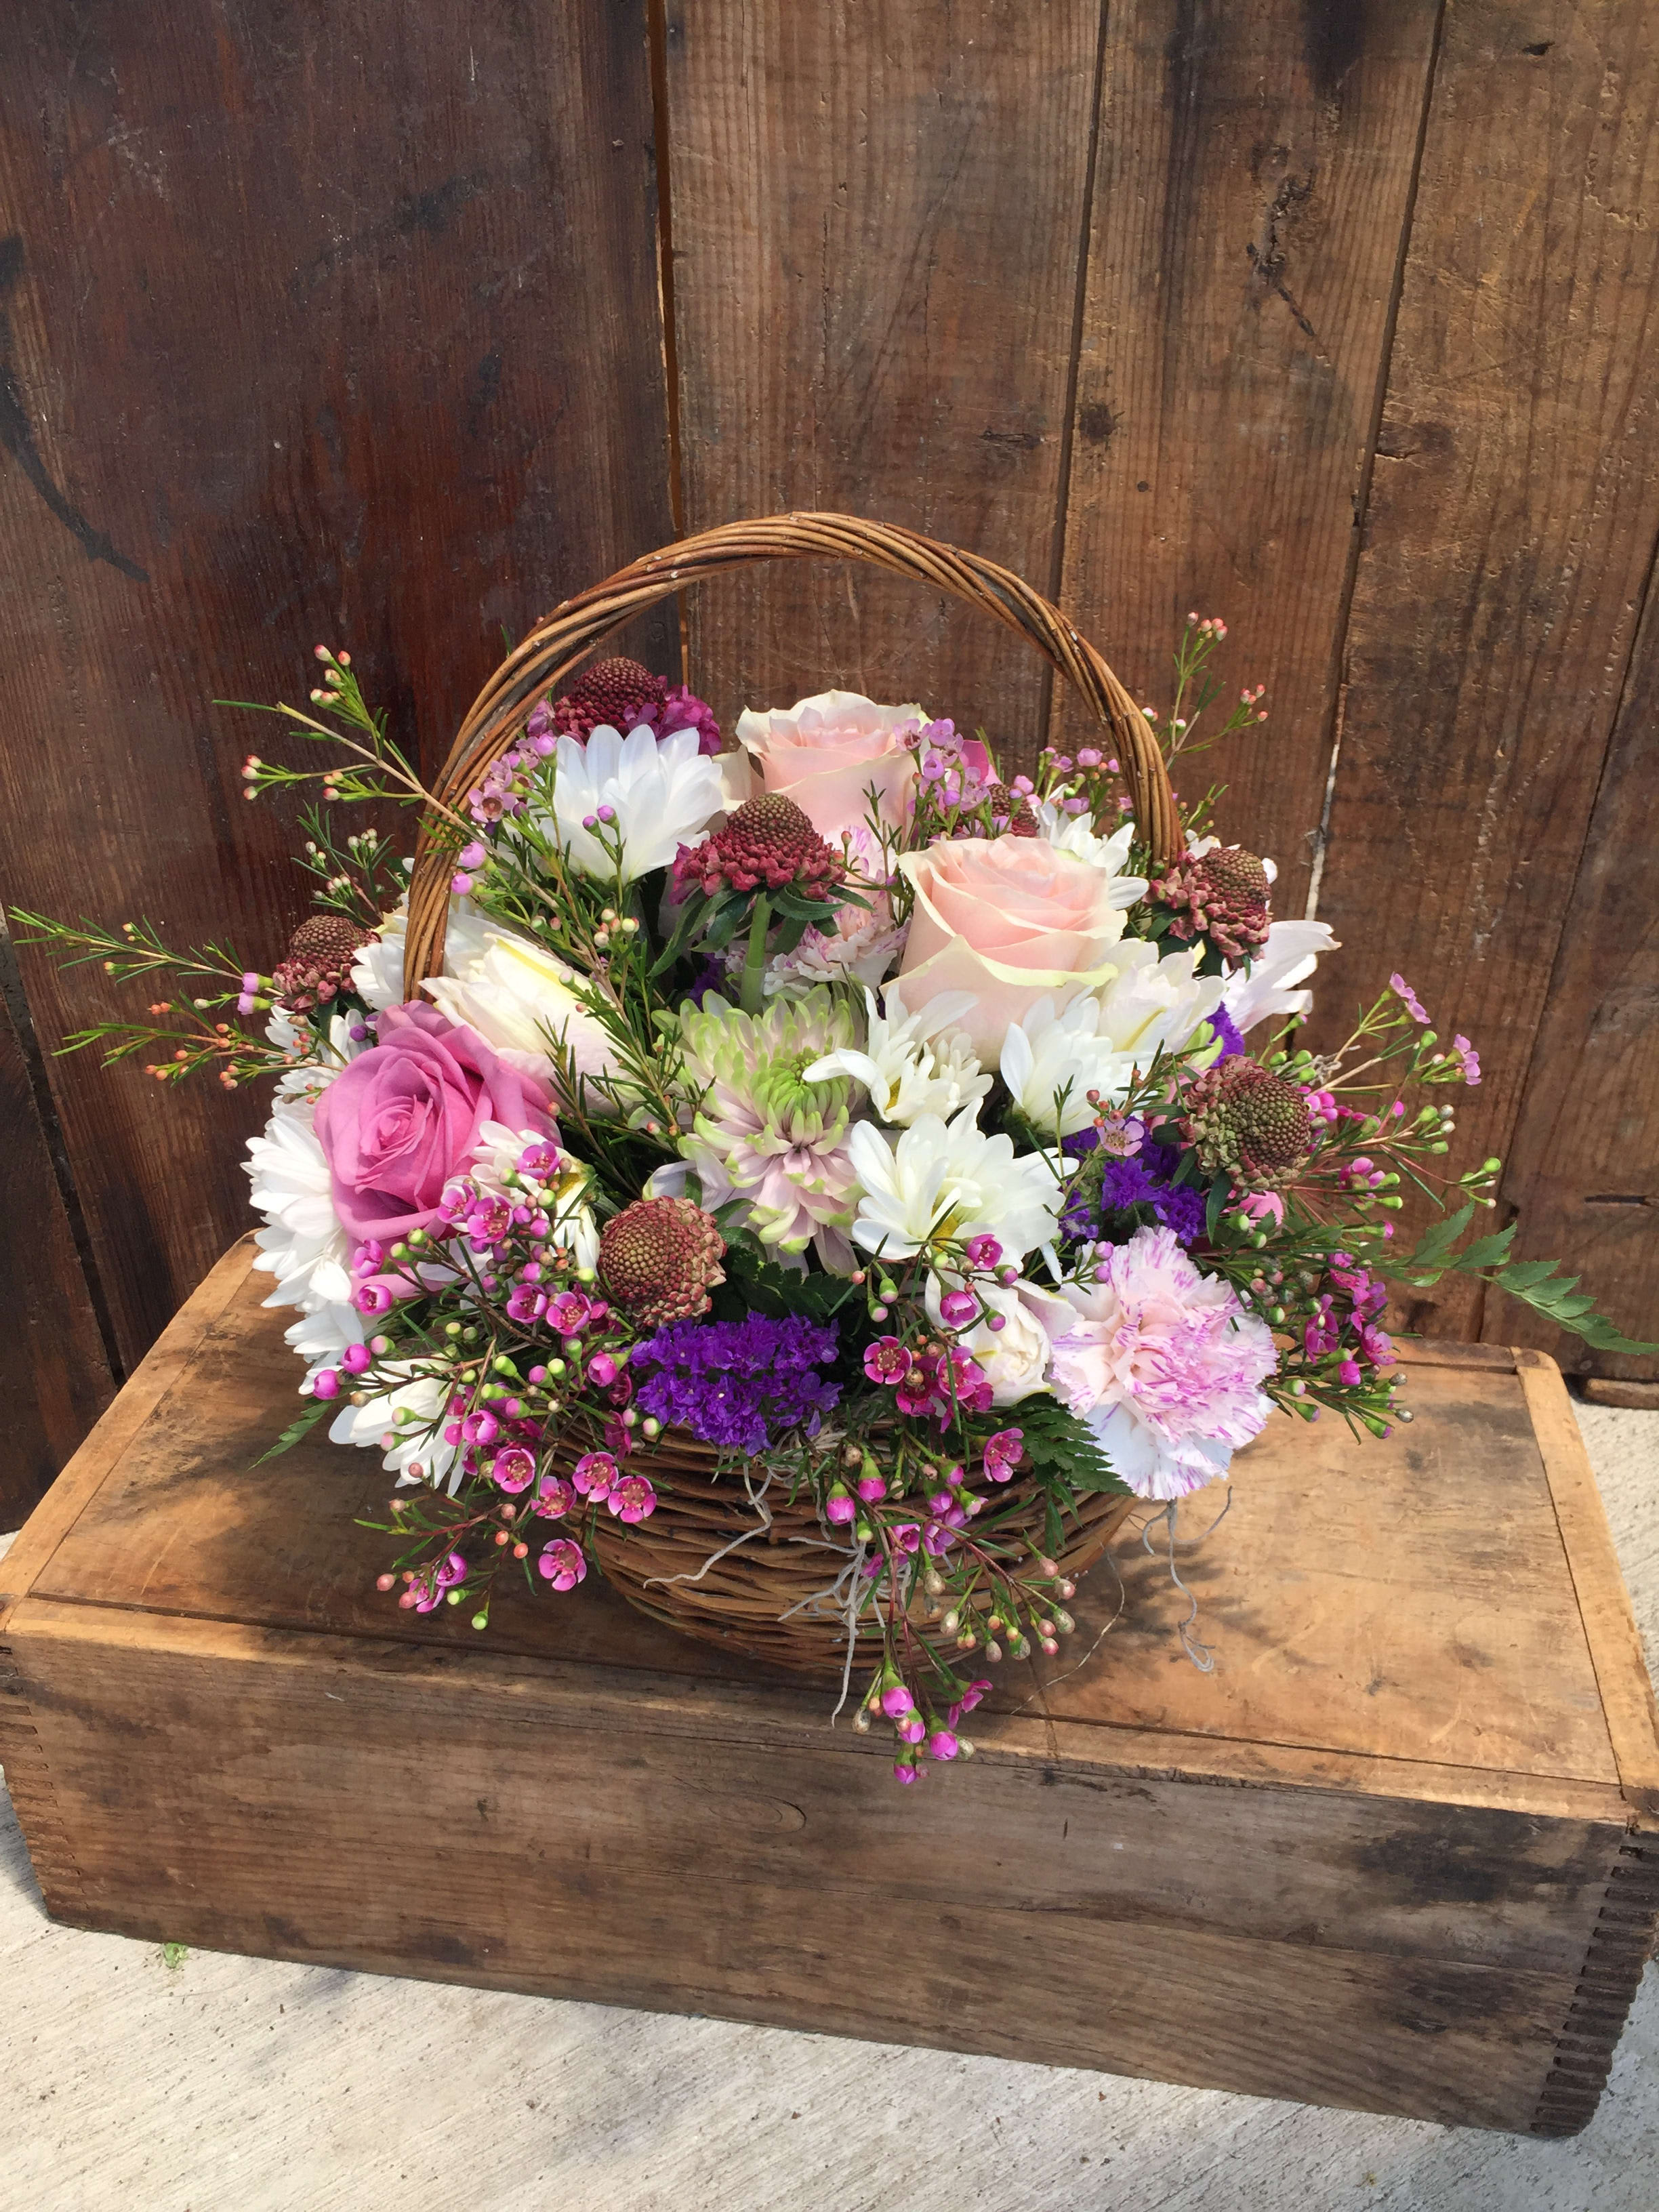 Basket of Feel Good Pinks - A basket of Seasonal Pink Blooms, ideal for a desk or small side table. A perfect gift for a wonderful Mother.